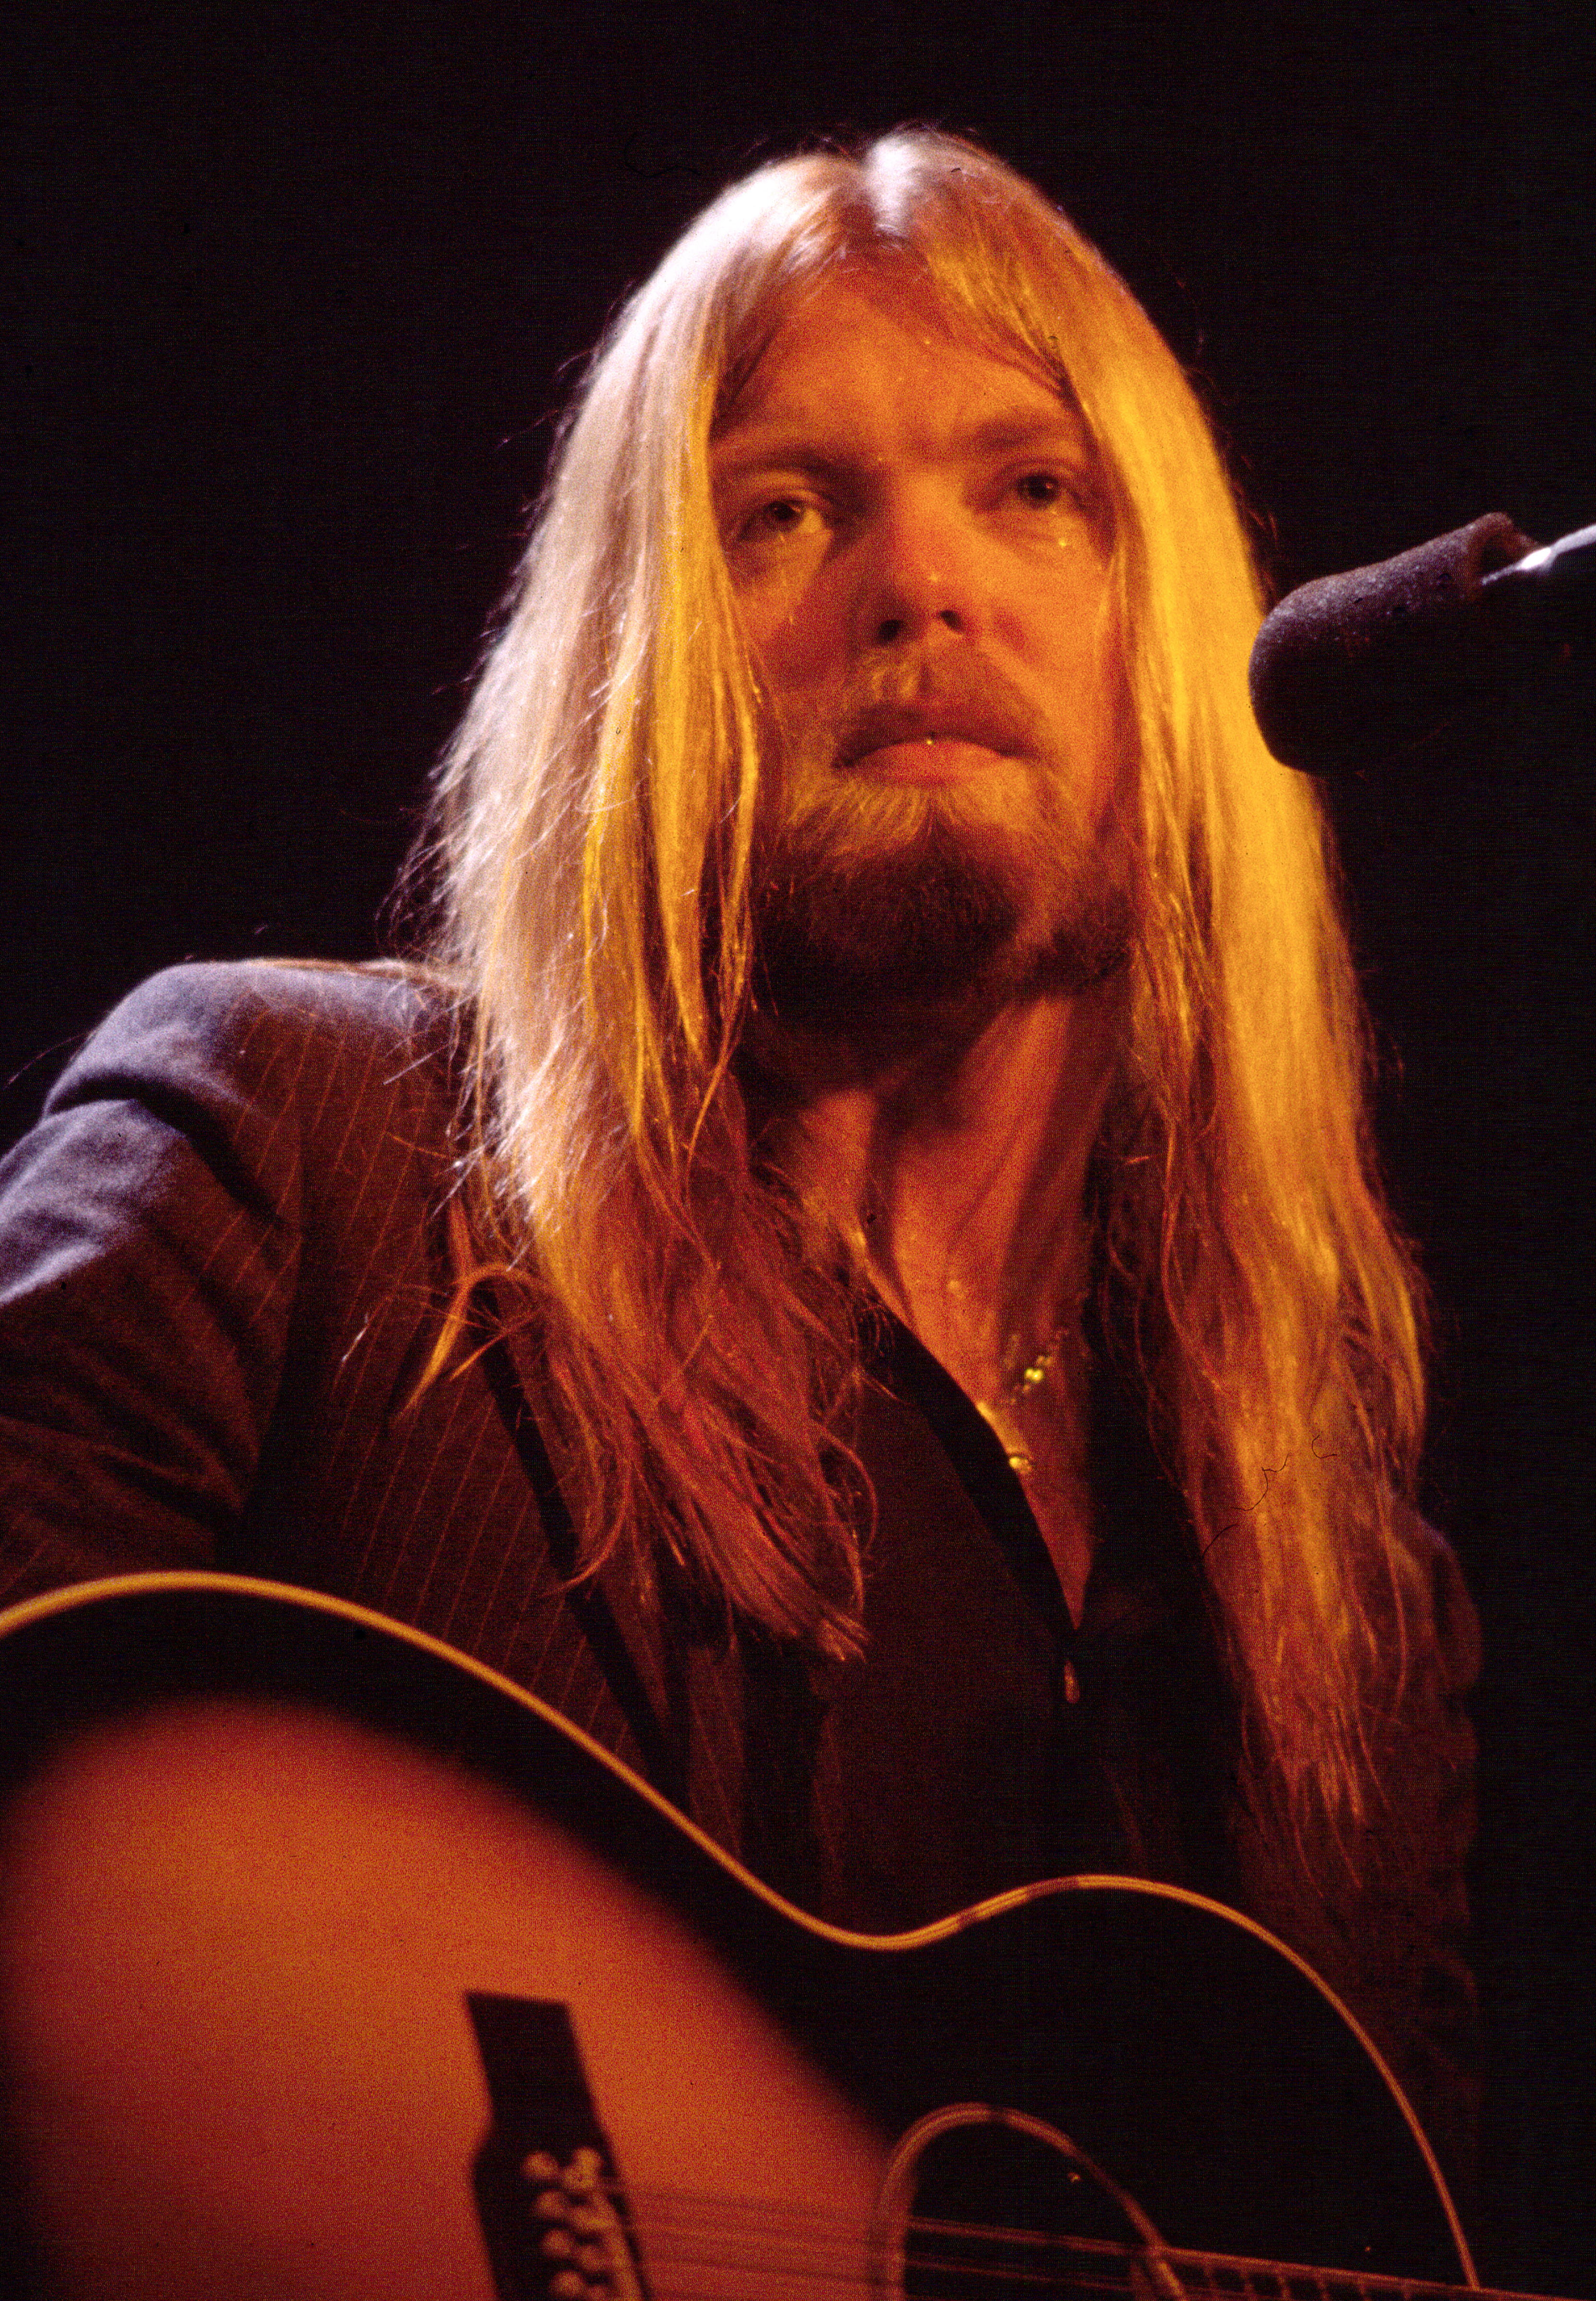 Gregg Allman plays guitar as he performs onstage at the Capitol Theatre in Passaic, New Jersey, on December 16, 1981. | Source: Getty Images